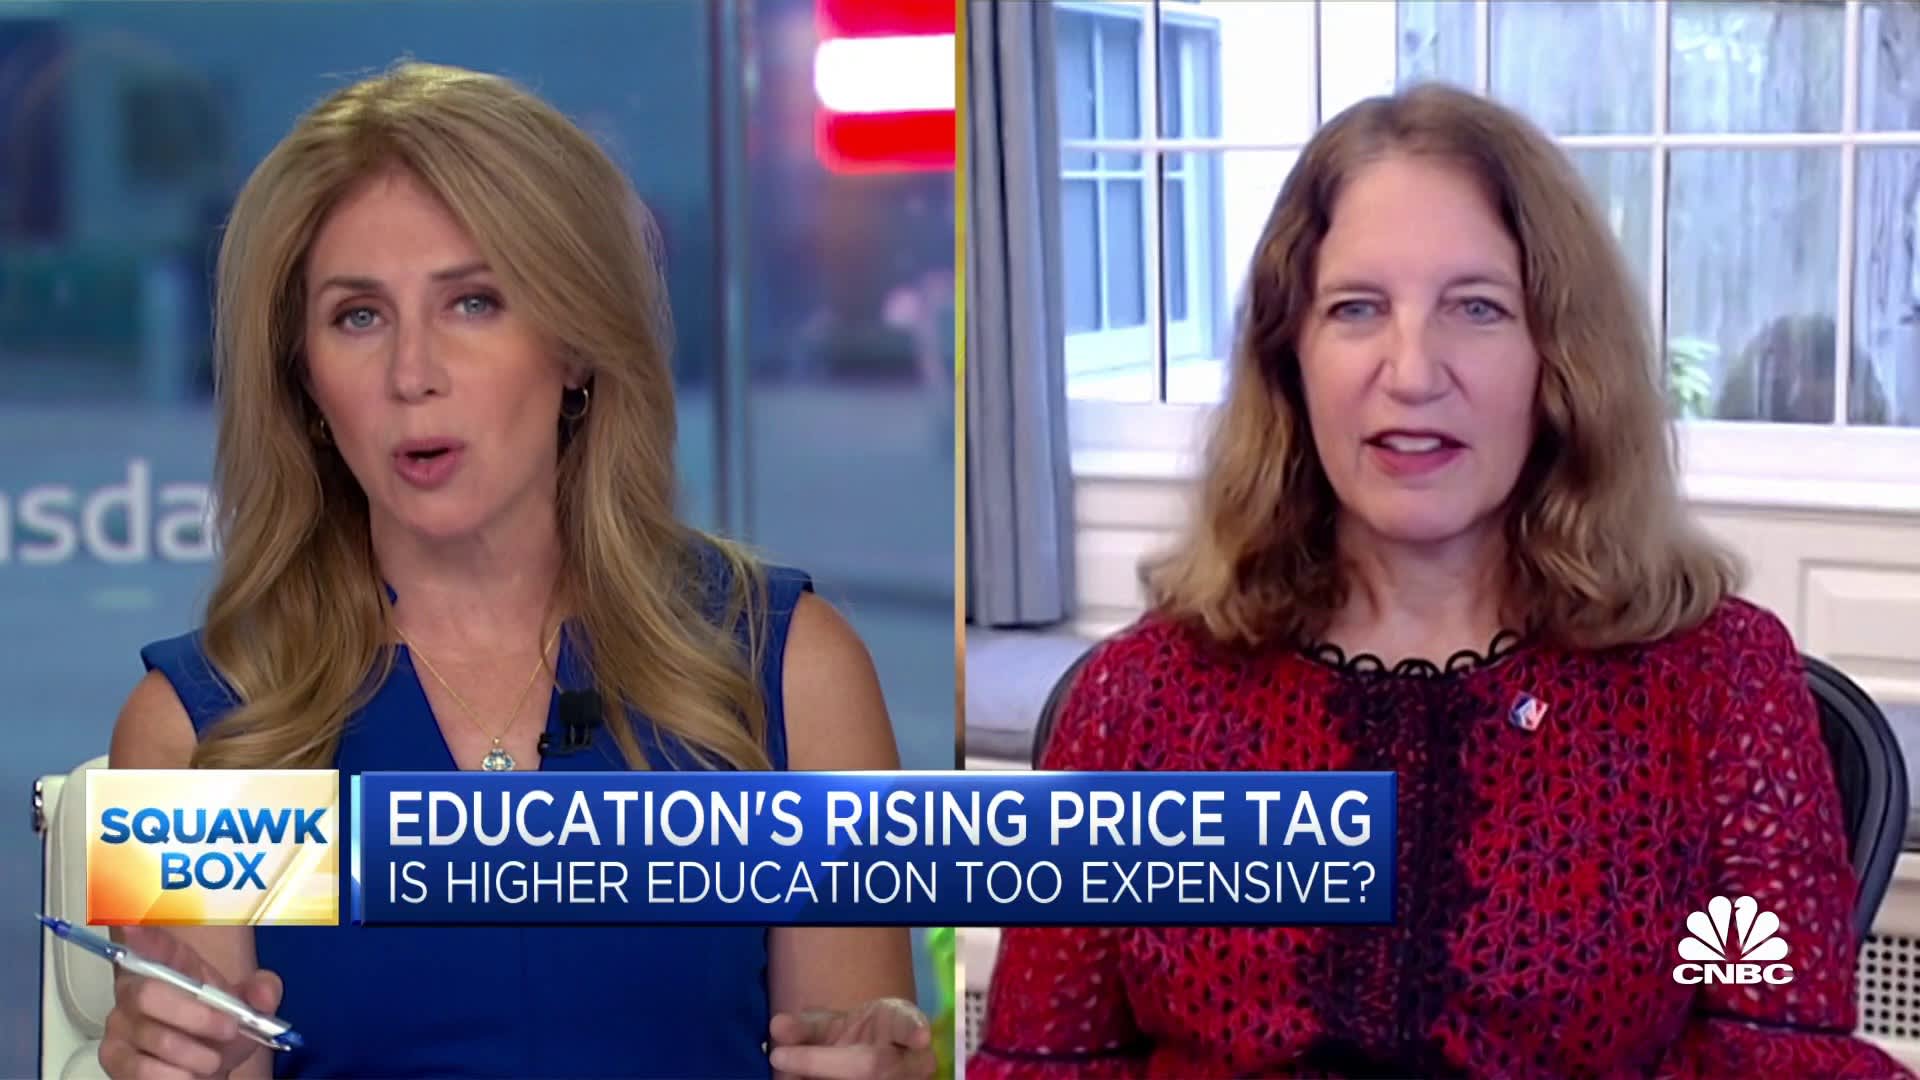 American University president on rising college costs: We have to focus on the value proposition